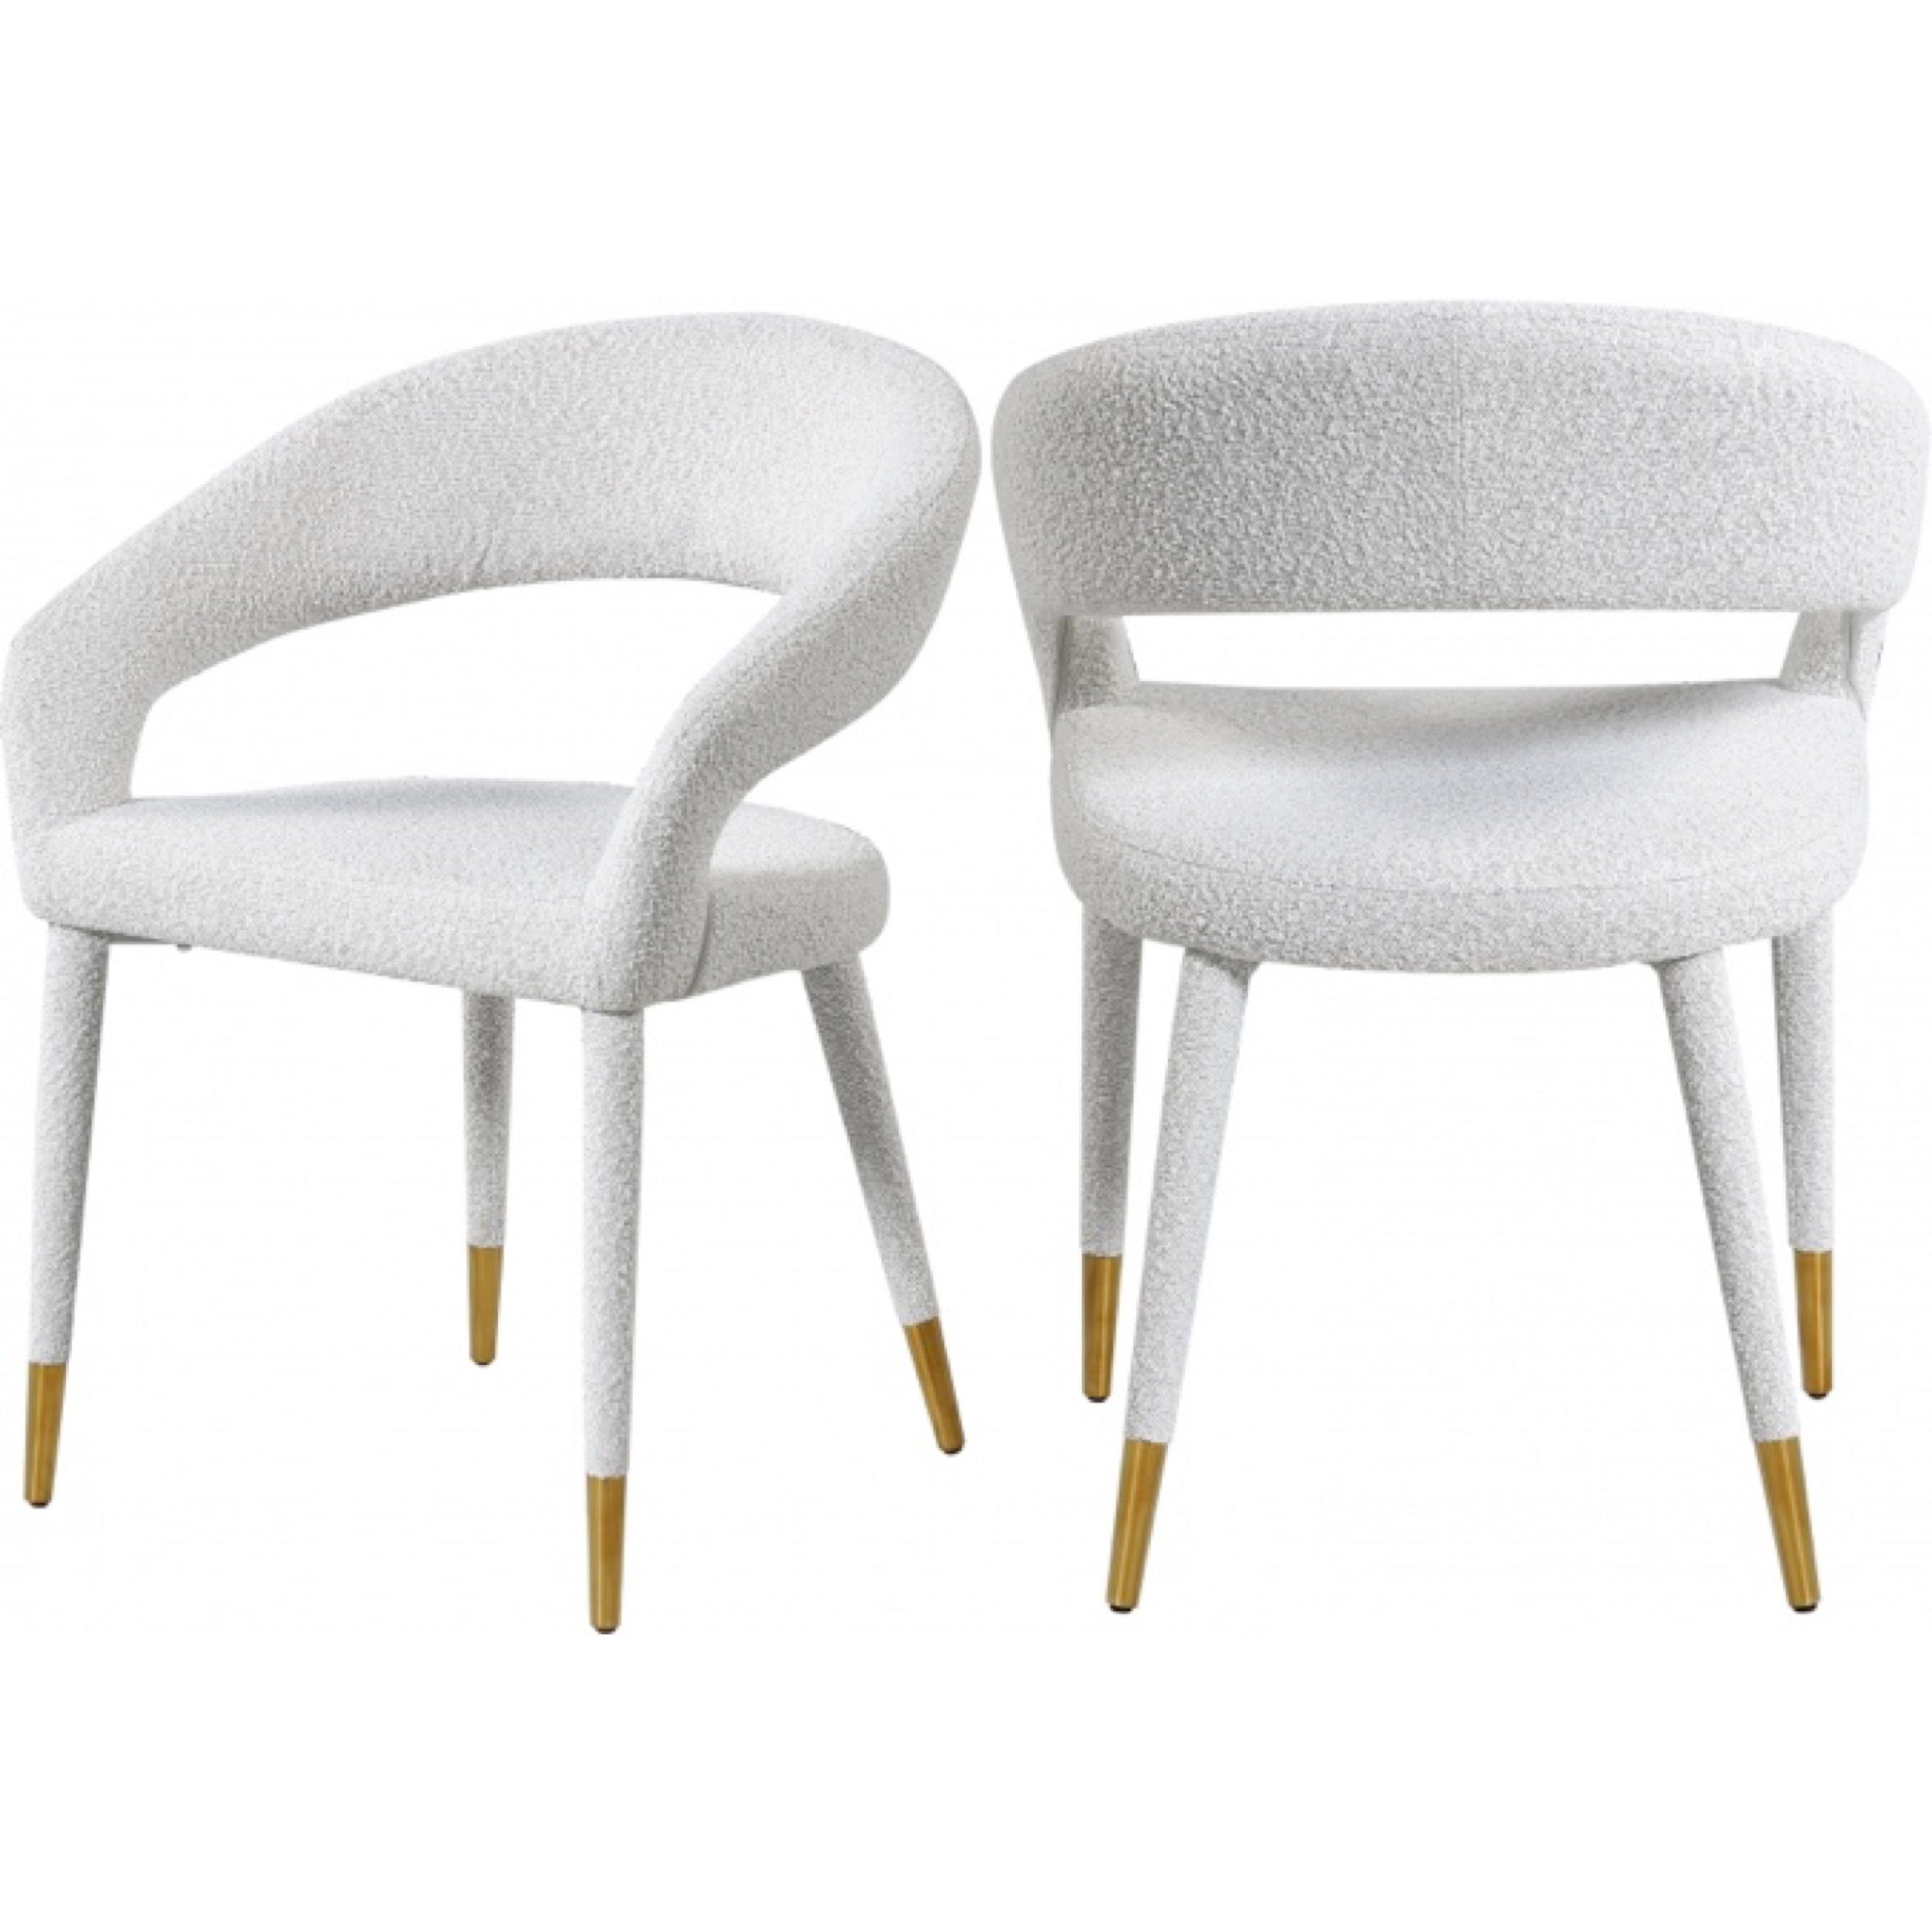 DESTINY BOUCLE FABRIC DINING CHAIR